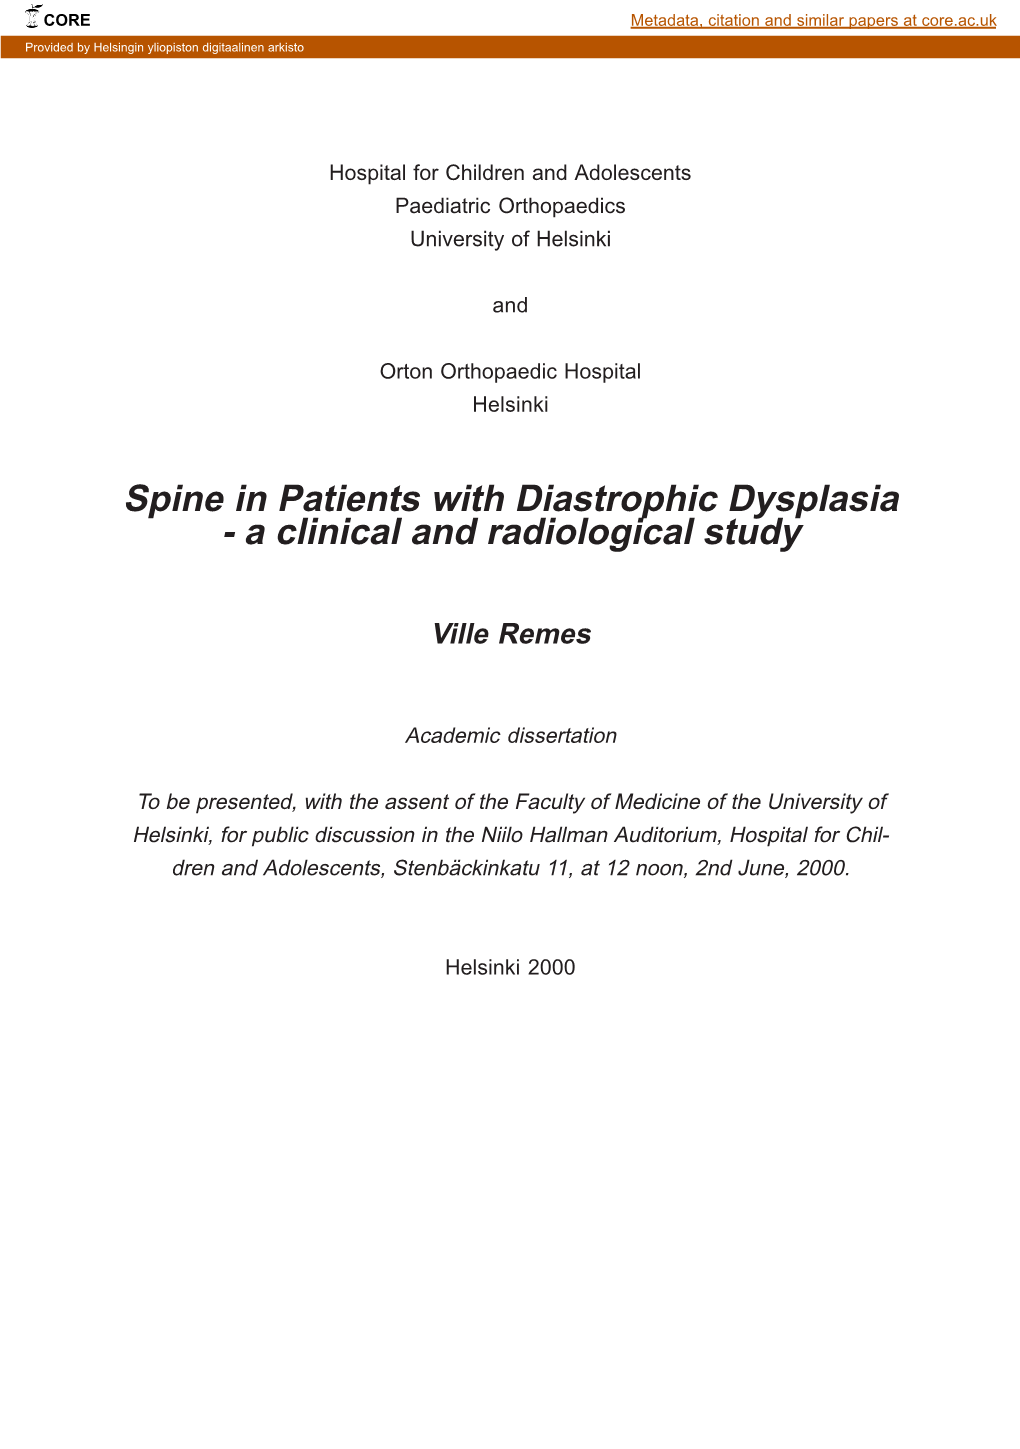 Spine in Patients with Diastrophic Dysplasia - a Clinical and Radiological Study